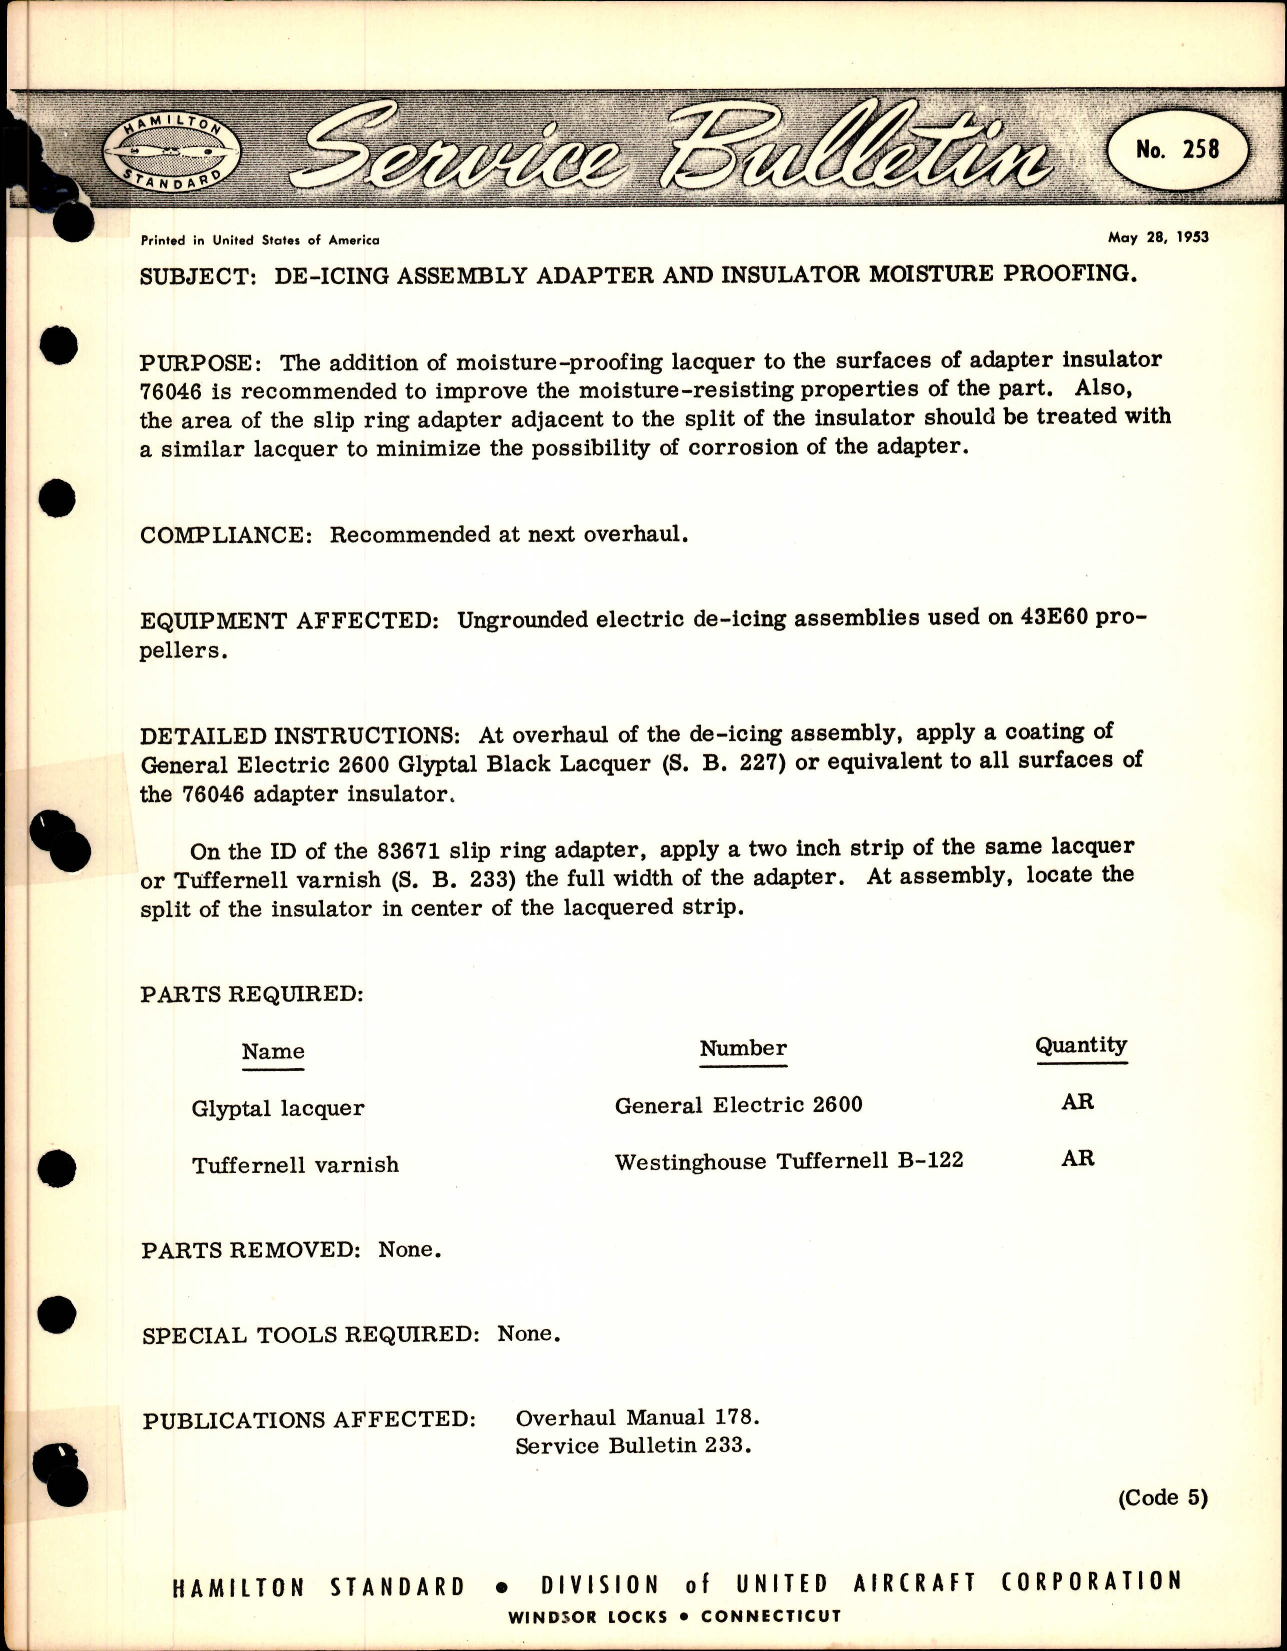 Sample page 1 from AirCorps Library document: De-Icing Assembly Adapter and Insulator Moisture Proofing